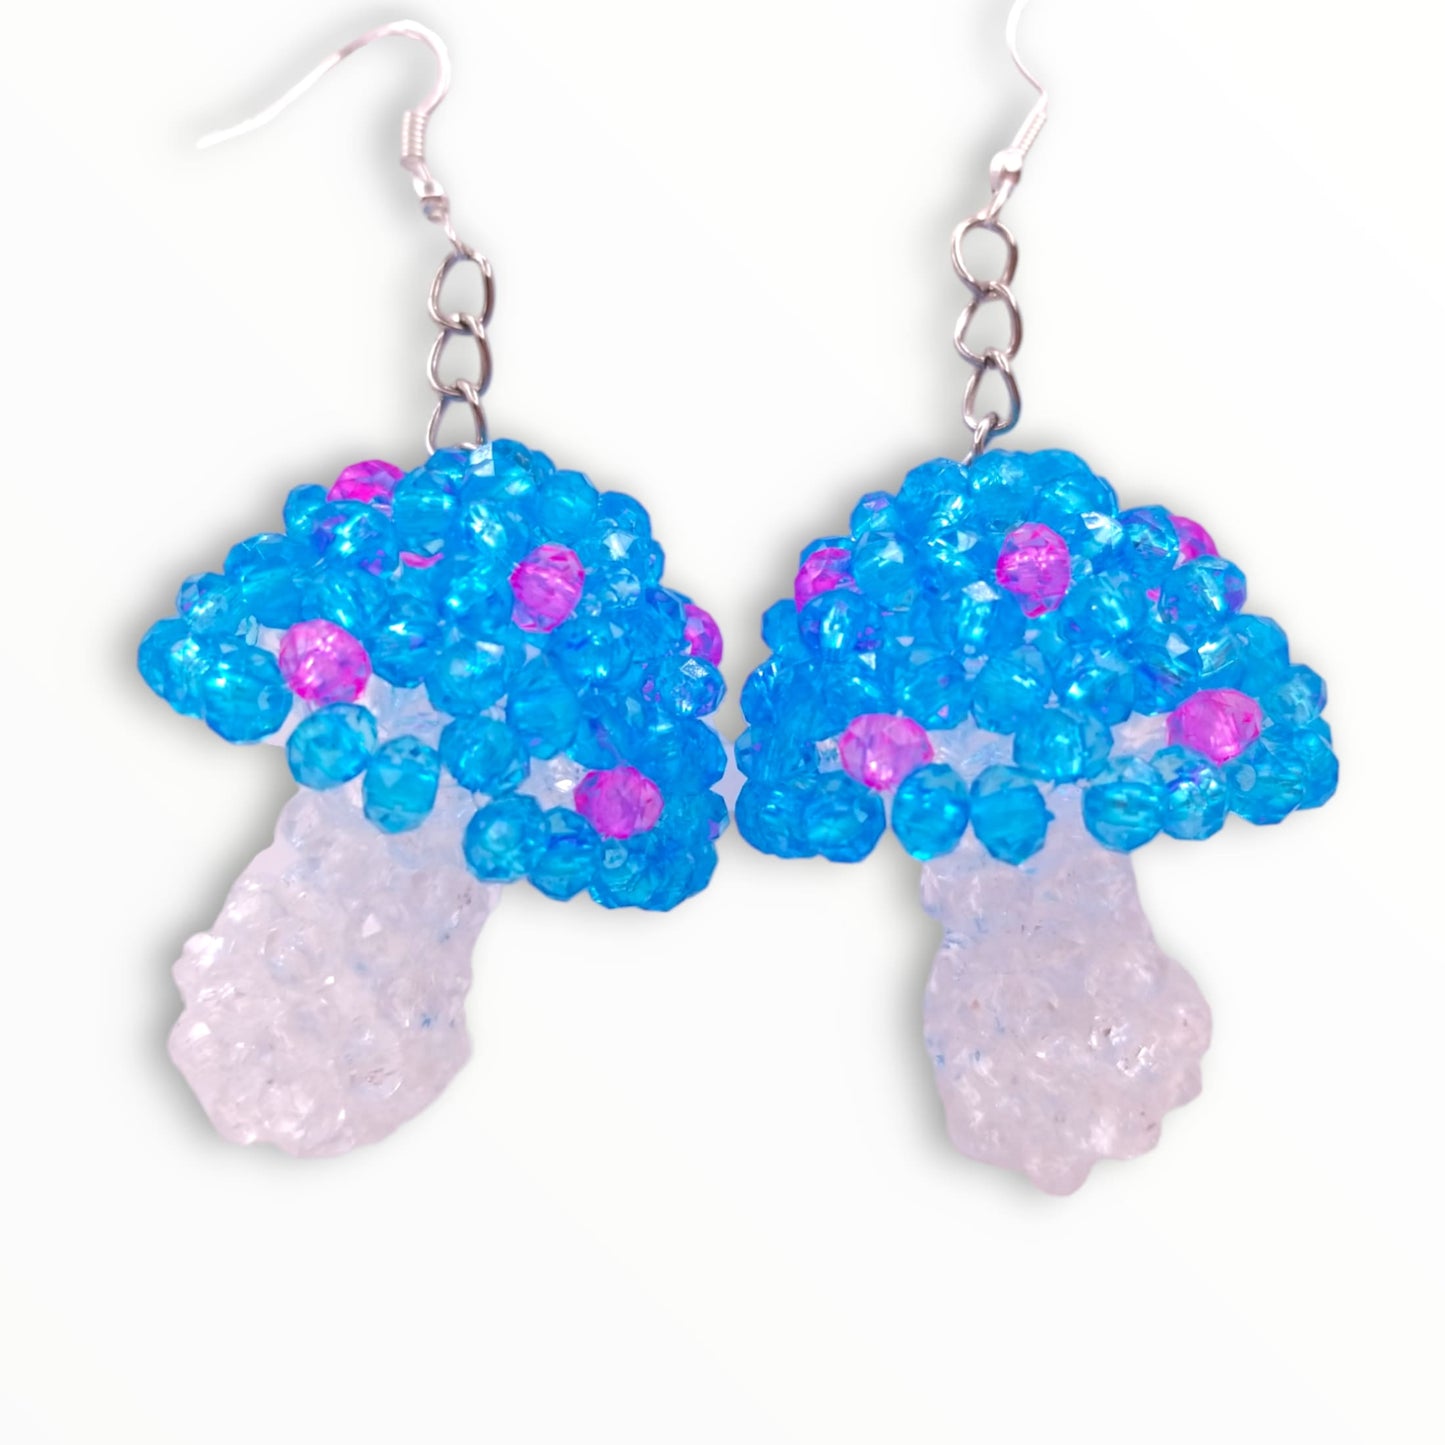 Large Beaded Mushroom Earrings from Confetti Kitty, Only 9.99